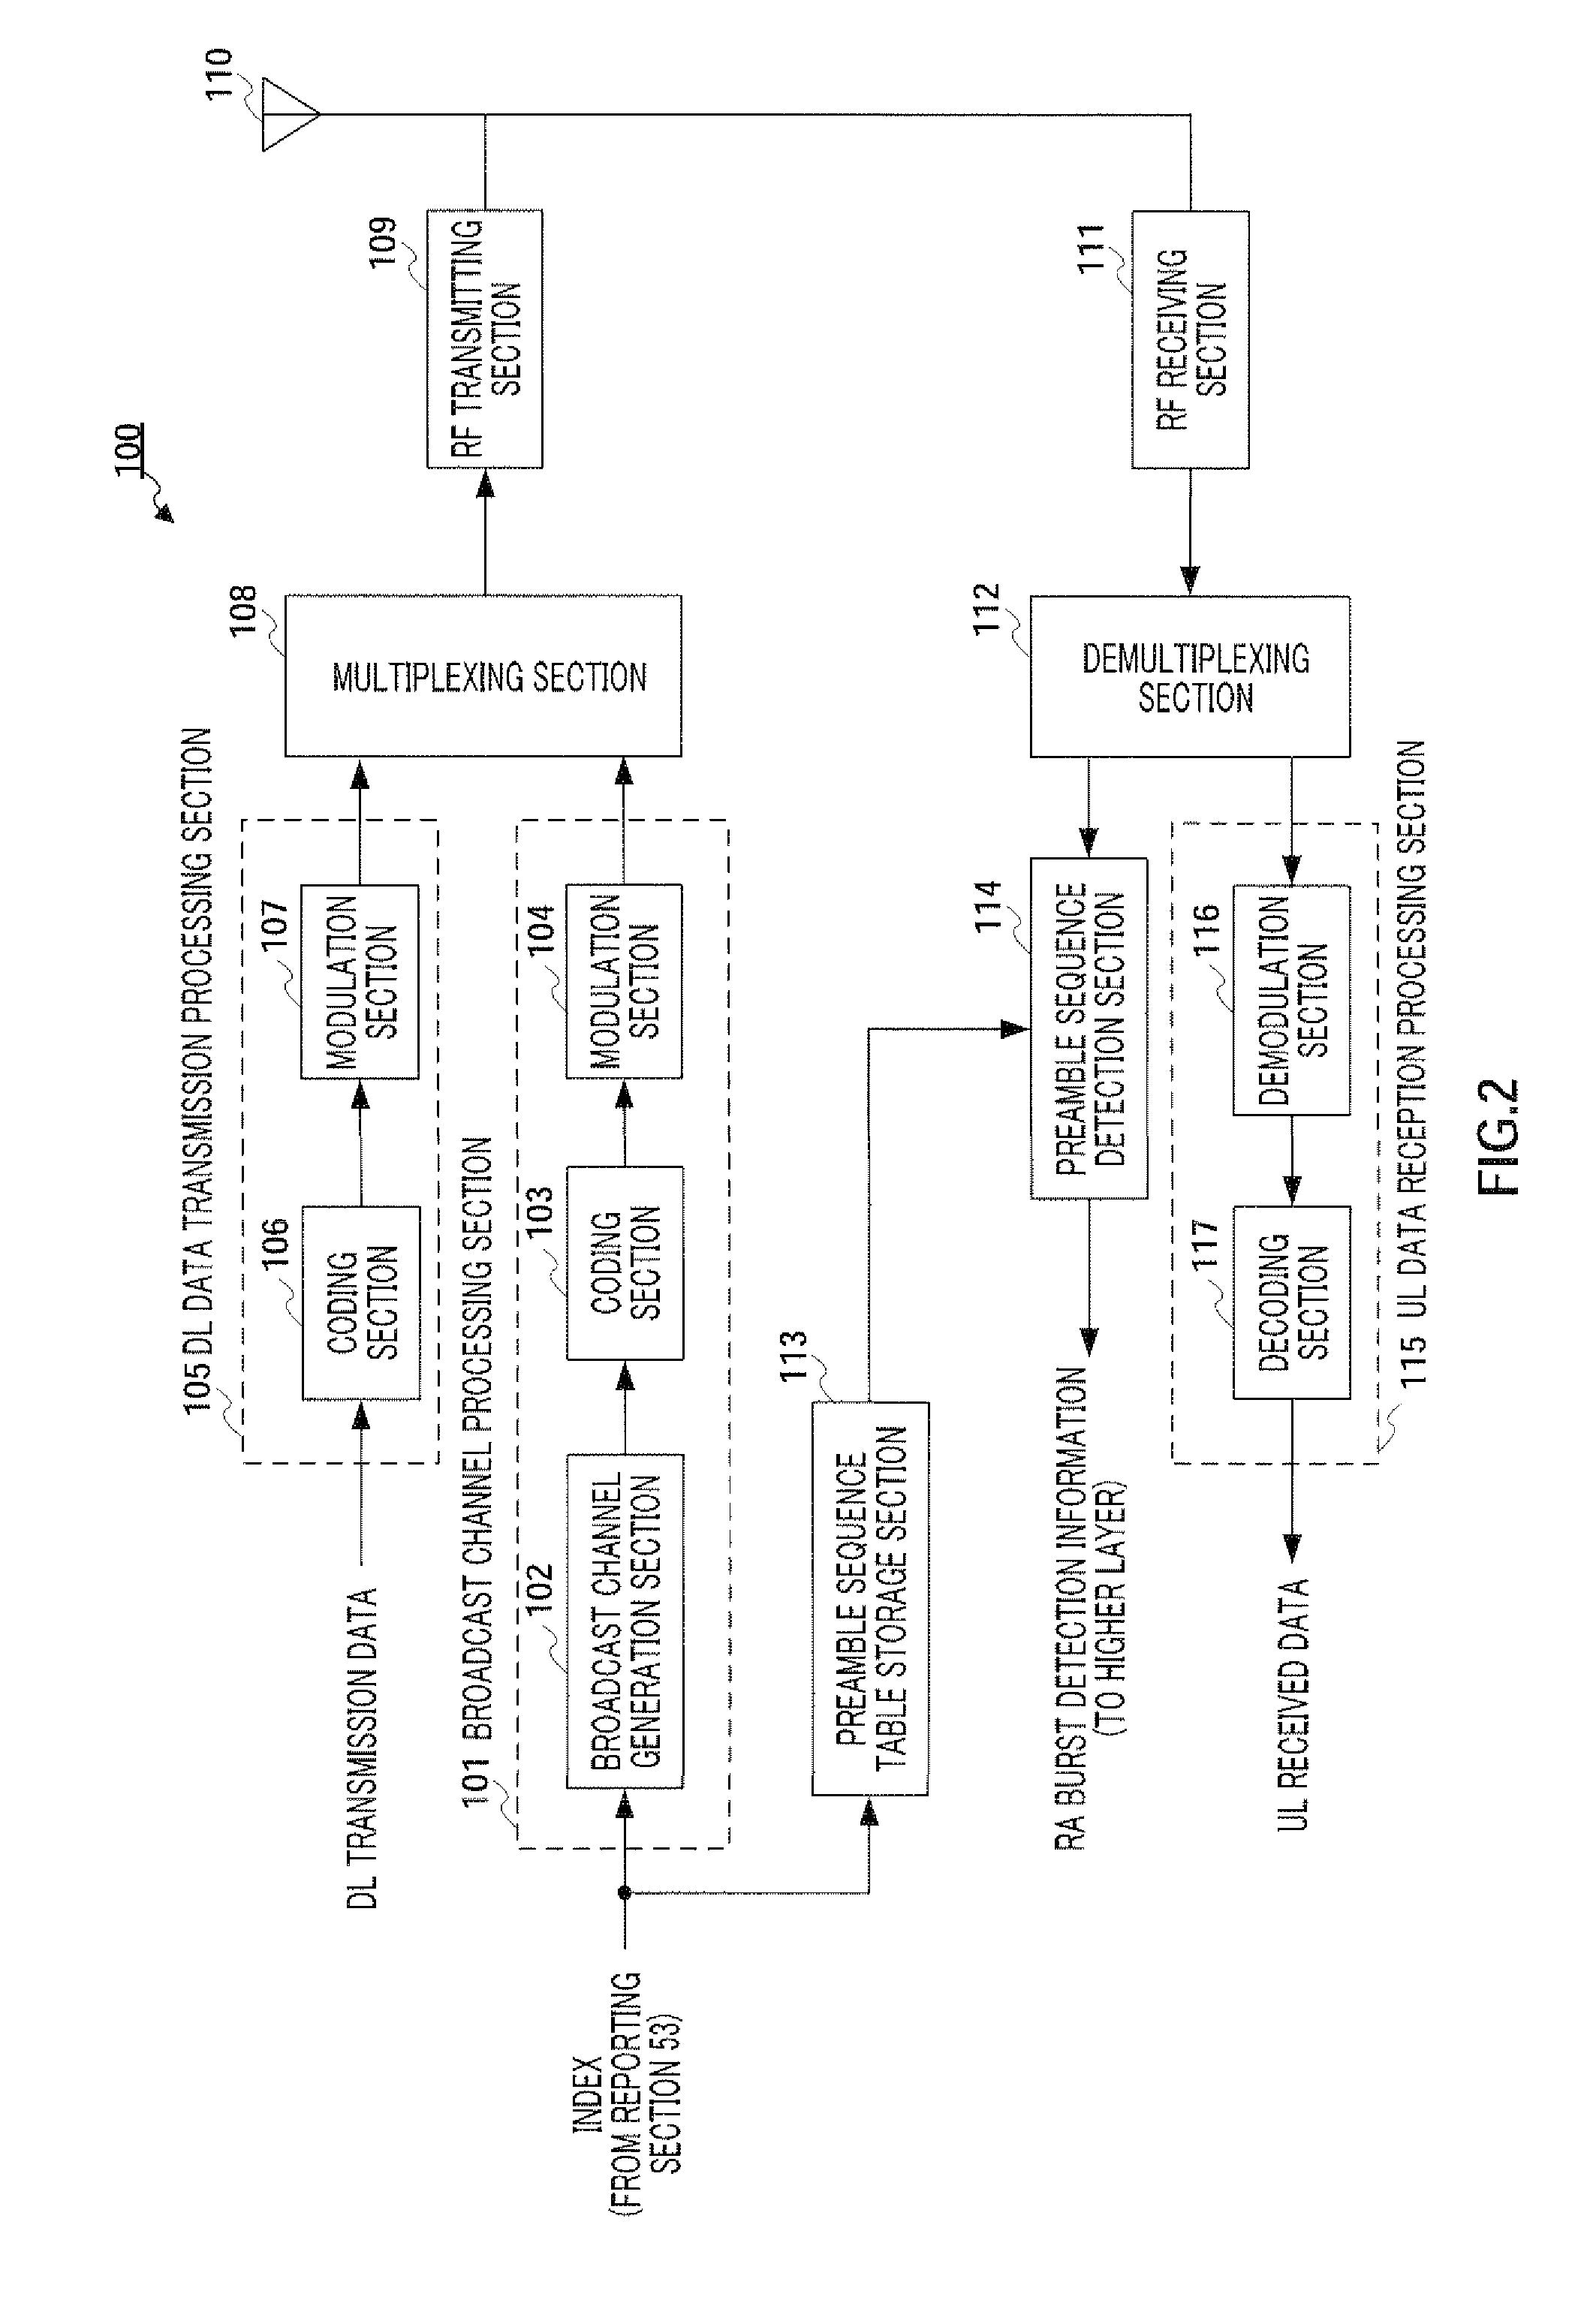 Sequence allocating method and sequence allocating apparatus